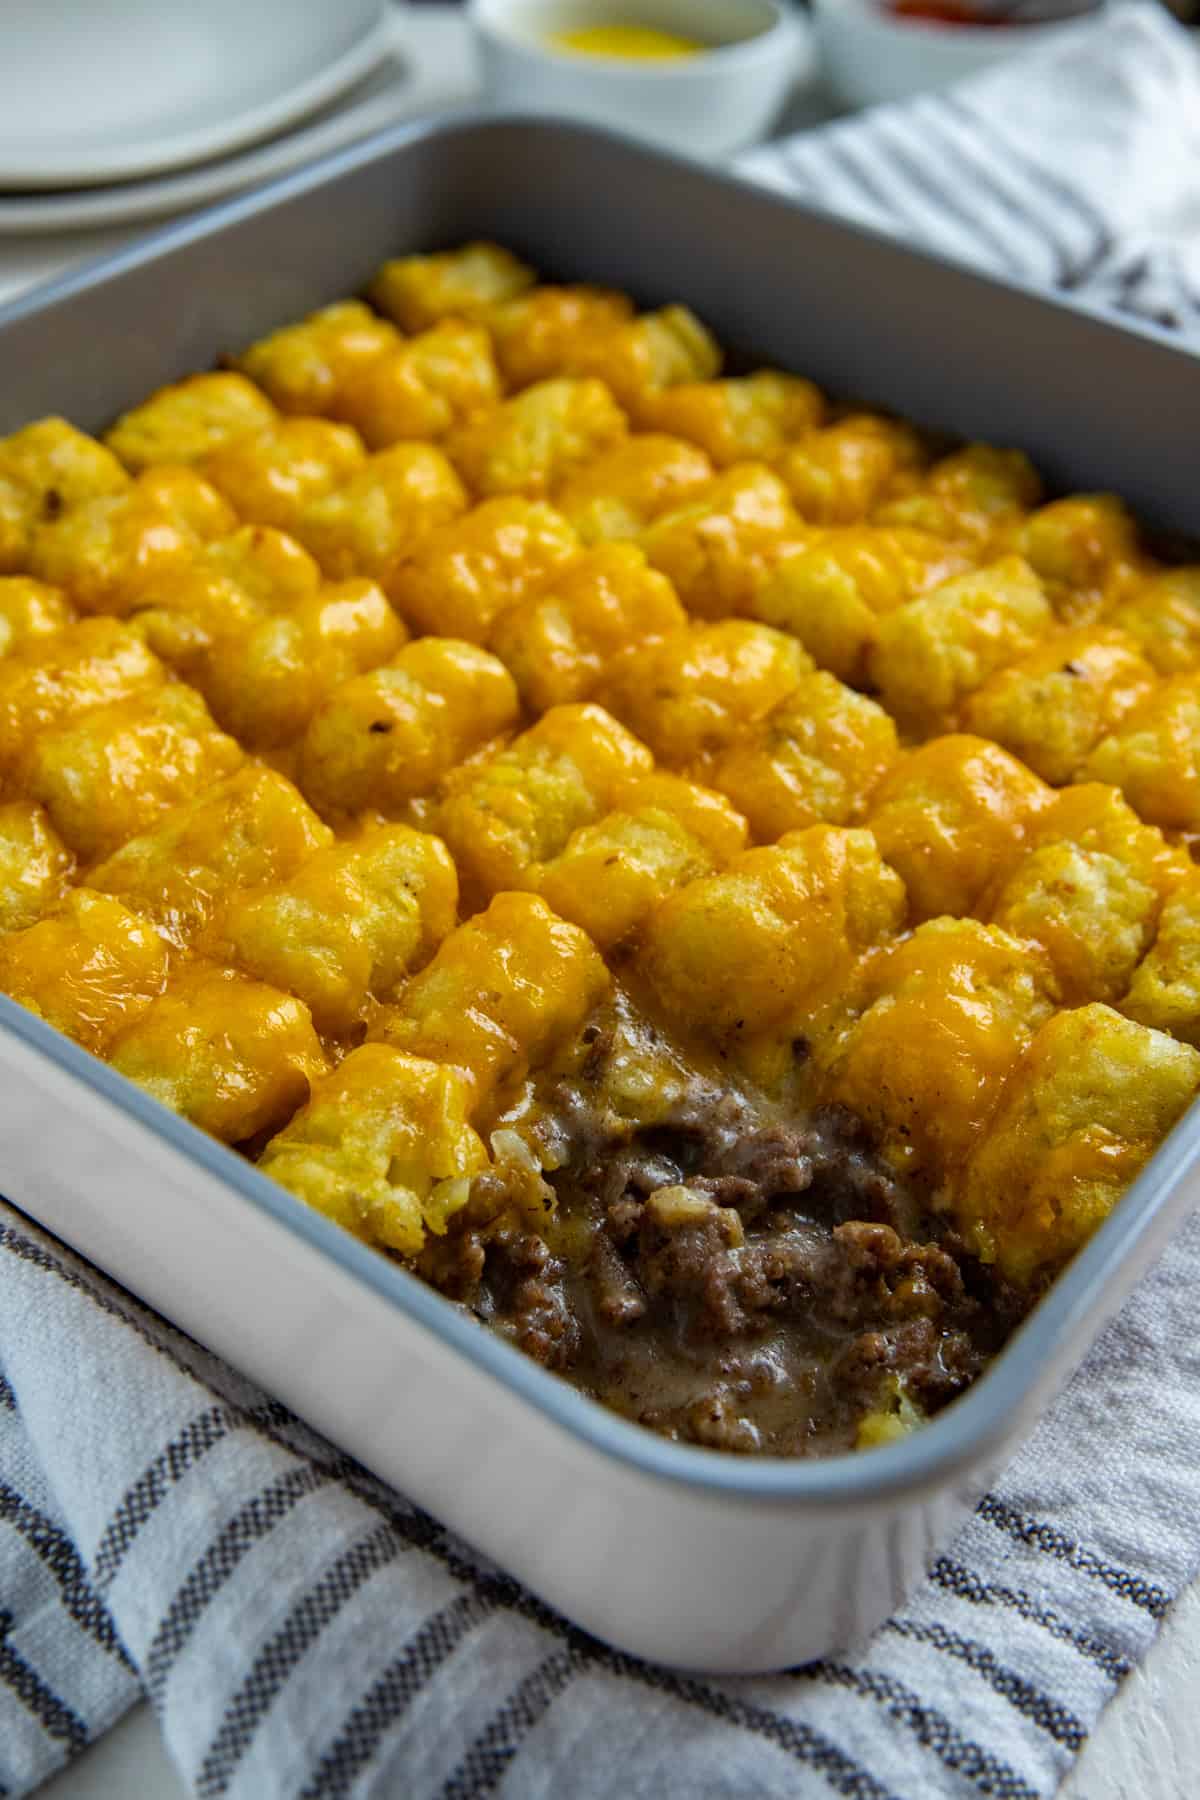 Baked tater tot casserole in square metal pan with scoop removed from corner. Mustard and ketchup in small round white bowls on the side.